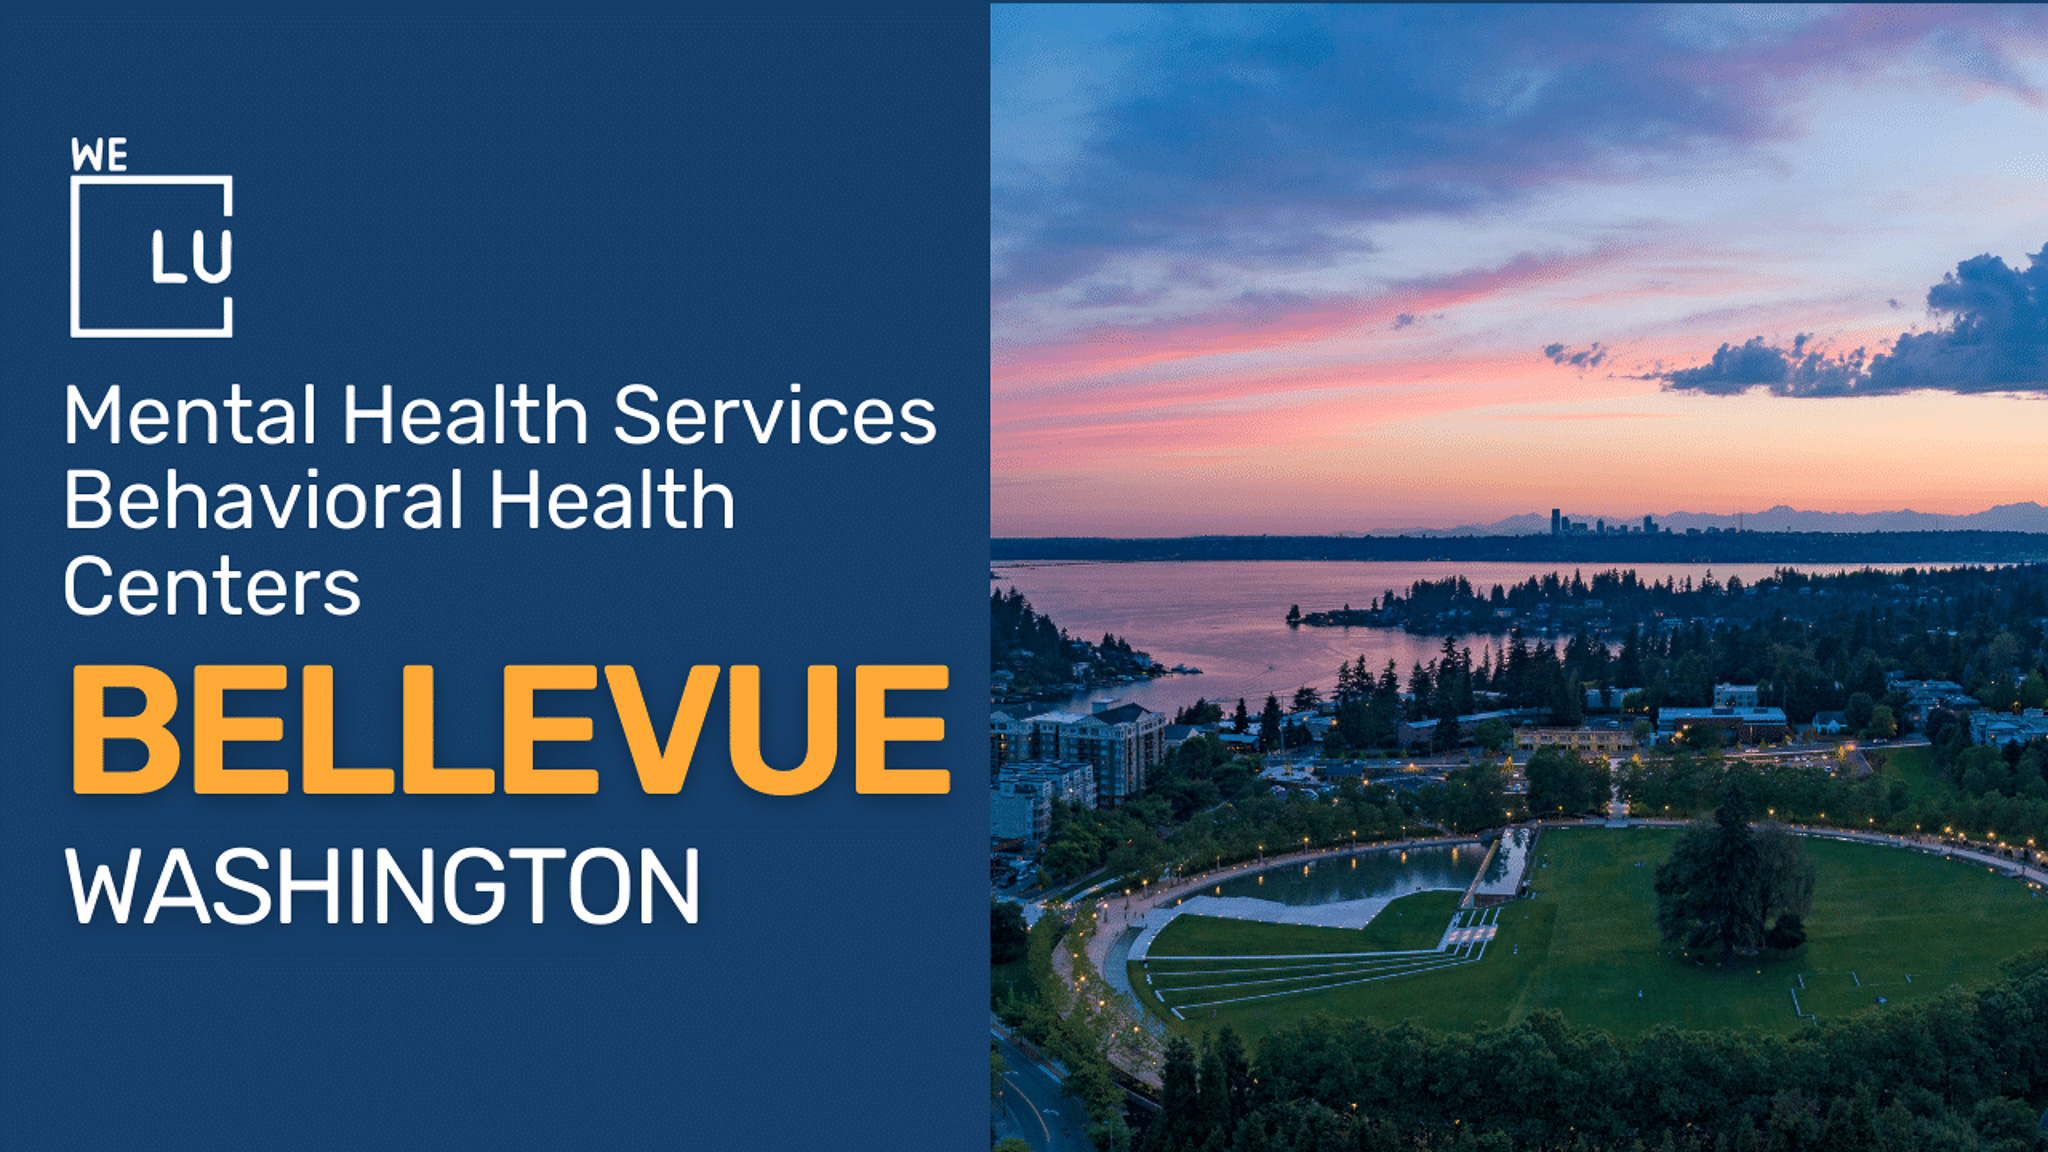 Bellevue WA We Level Up treatment center for drug and alcohol rehab detox and mental health services - Image 1